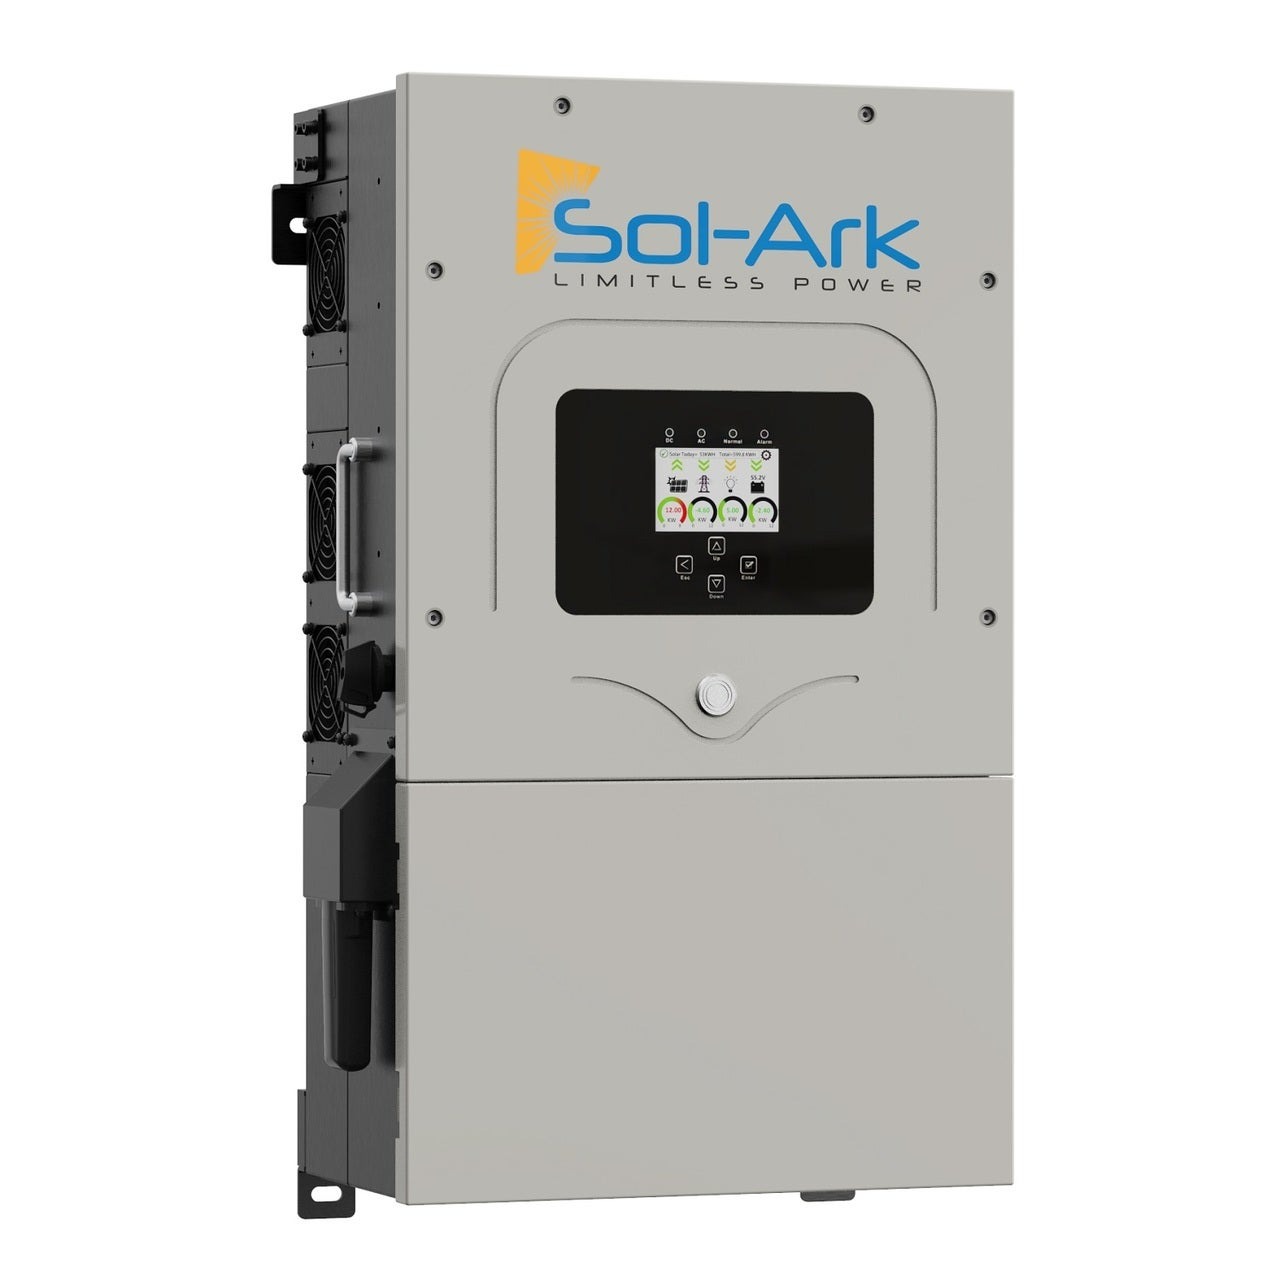 A photo of a sol-ark inverter